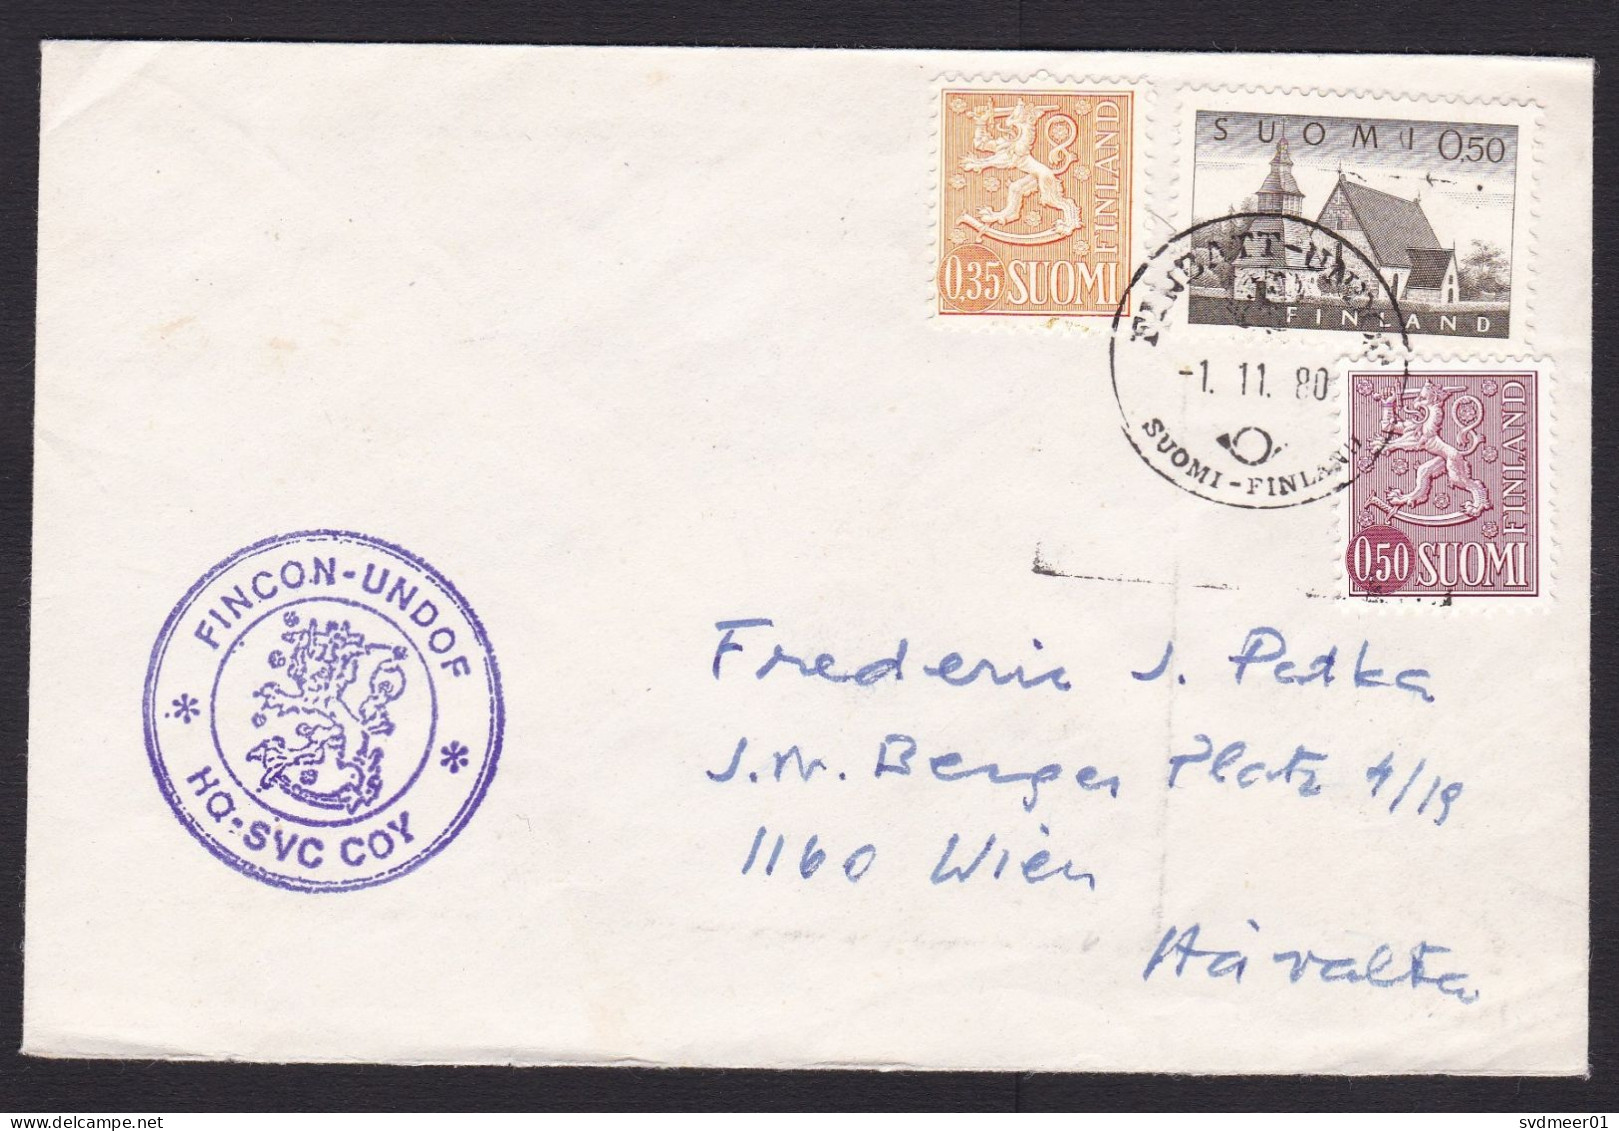 Finland: Cover To Austria, 1980, 3 Stamps, Military Cancel UNDOF, UN Forces Golan, Syria-Israel, Rare (traces Of Use) - Covers & Documents